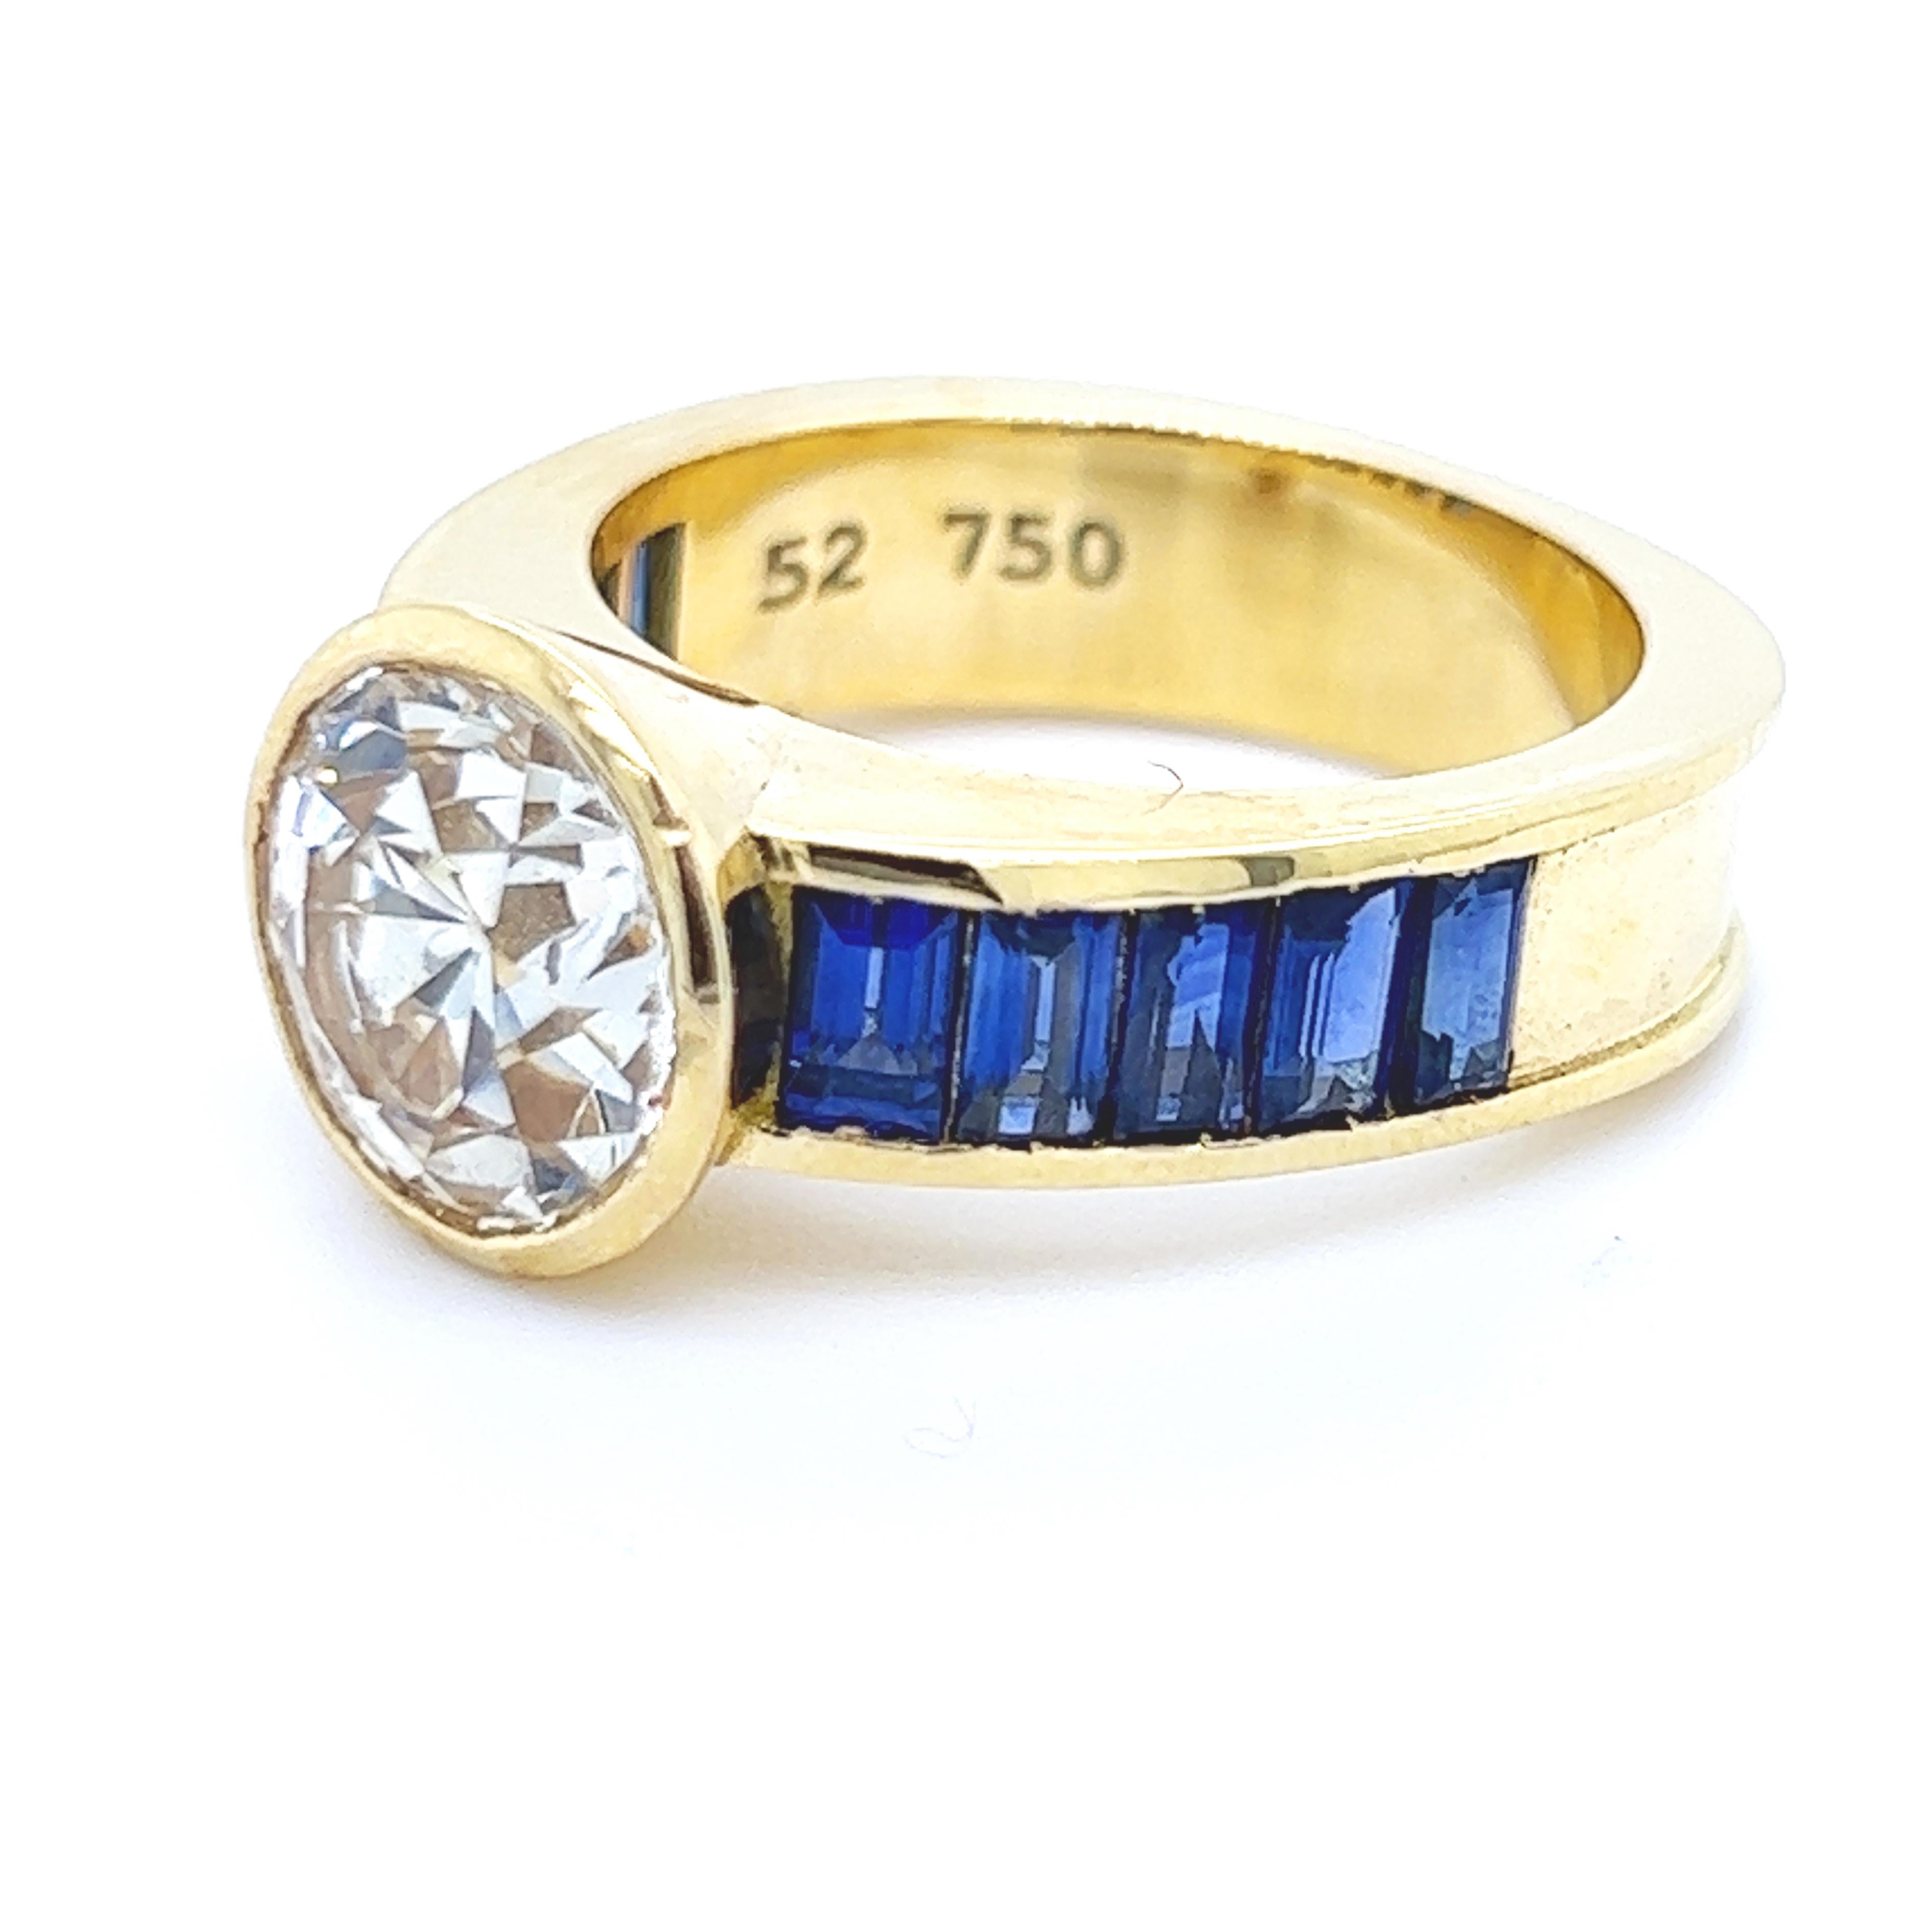 Original 1980 3.29Kt White Diamond 1.96 Kt Blue Sapphire Baguette Cocktail Ring In New Condition For Sale In Valenza, IT